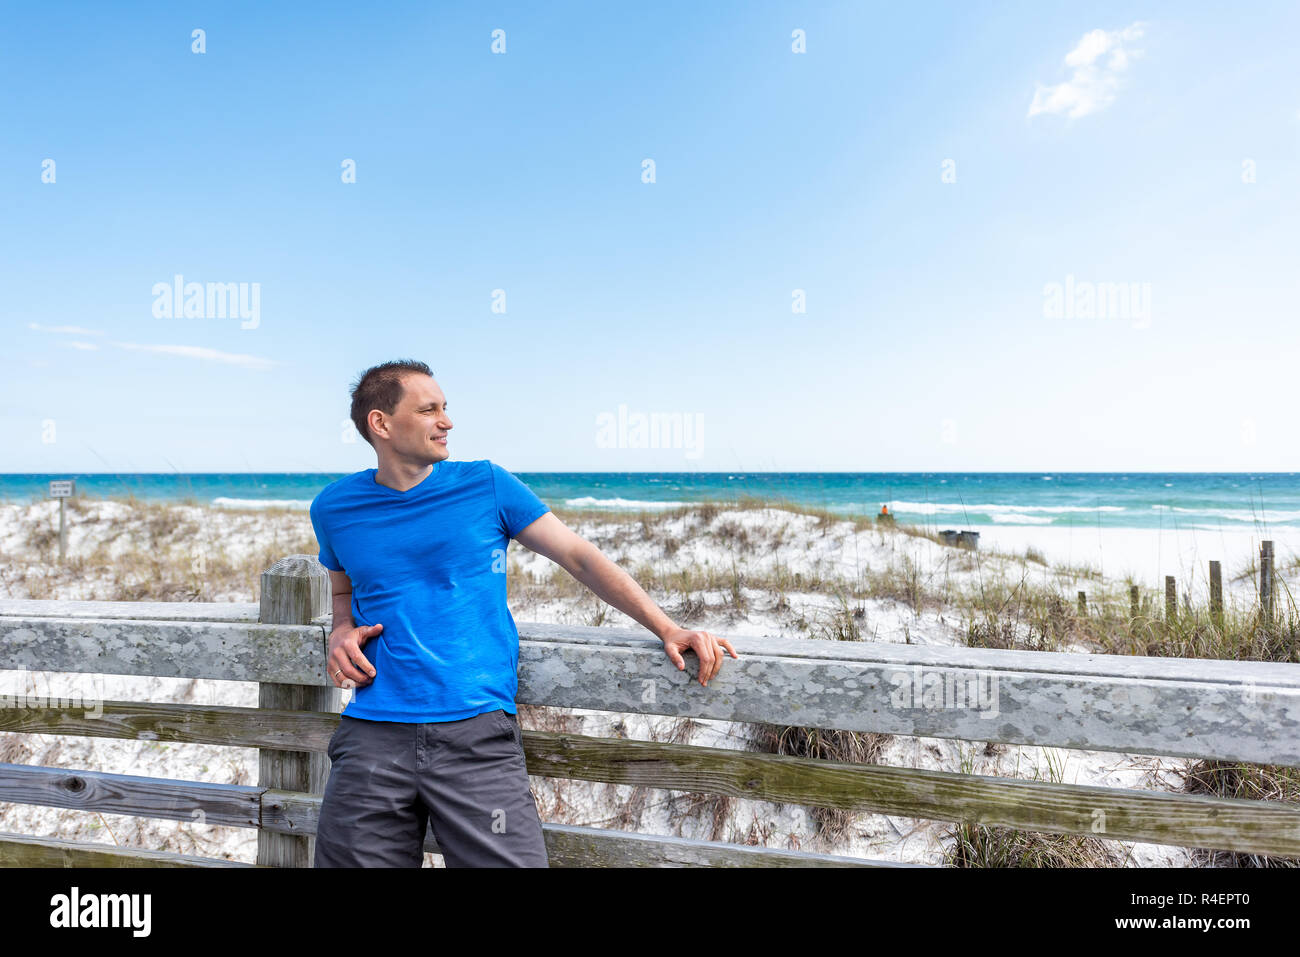 Destin, USA Miramar beach city town village day in Florida panhandle gulf of mexico ocean water, young happy man in blue shirt leaning on wooden fence Stock Photo